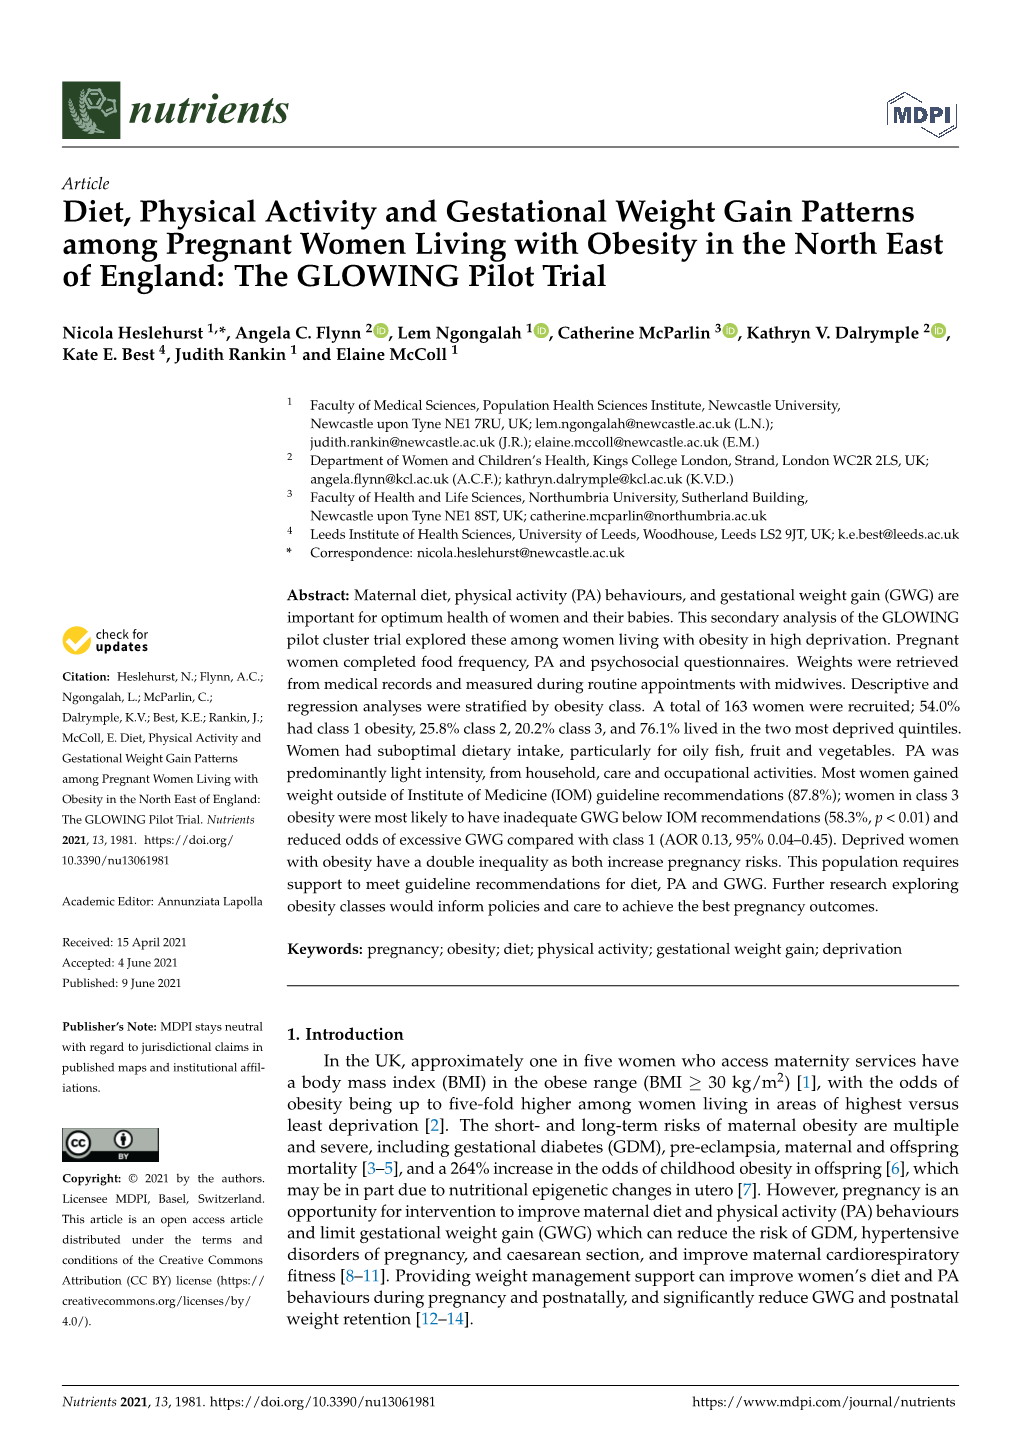 Diet, Physical Activity and Gestational Weight Gain Patterns Among Pregnant Women Living with Obesity in the North East of England: the GLOWING Pilot Trial